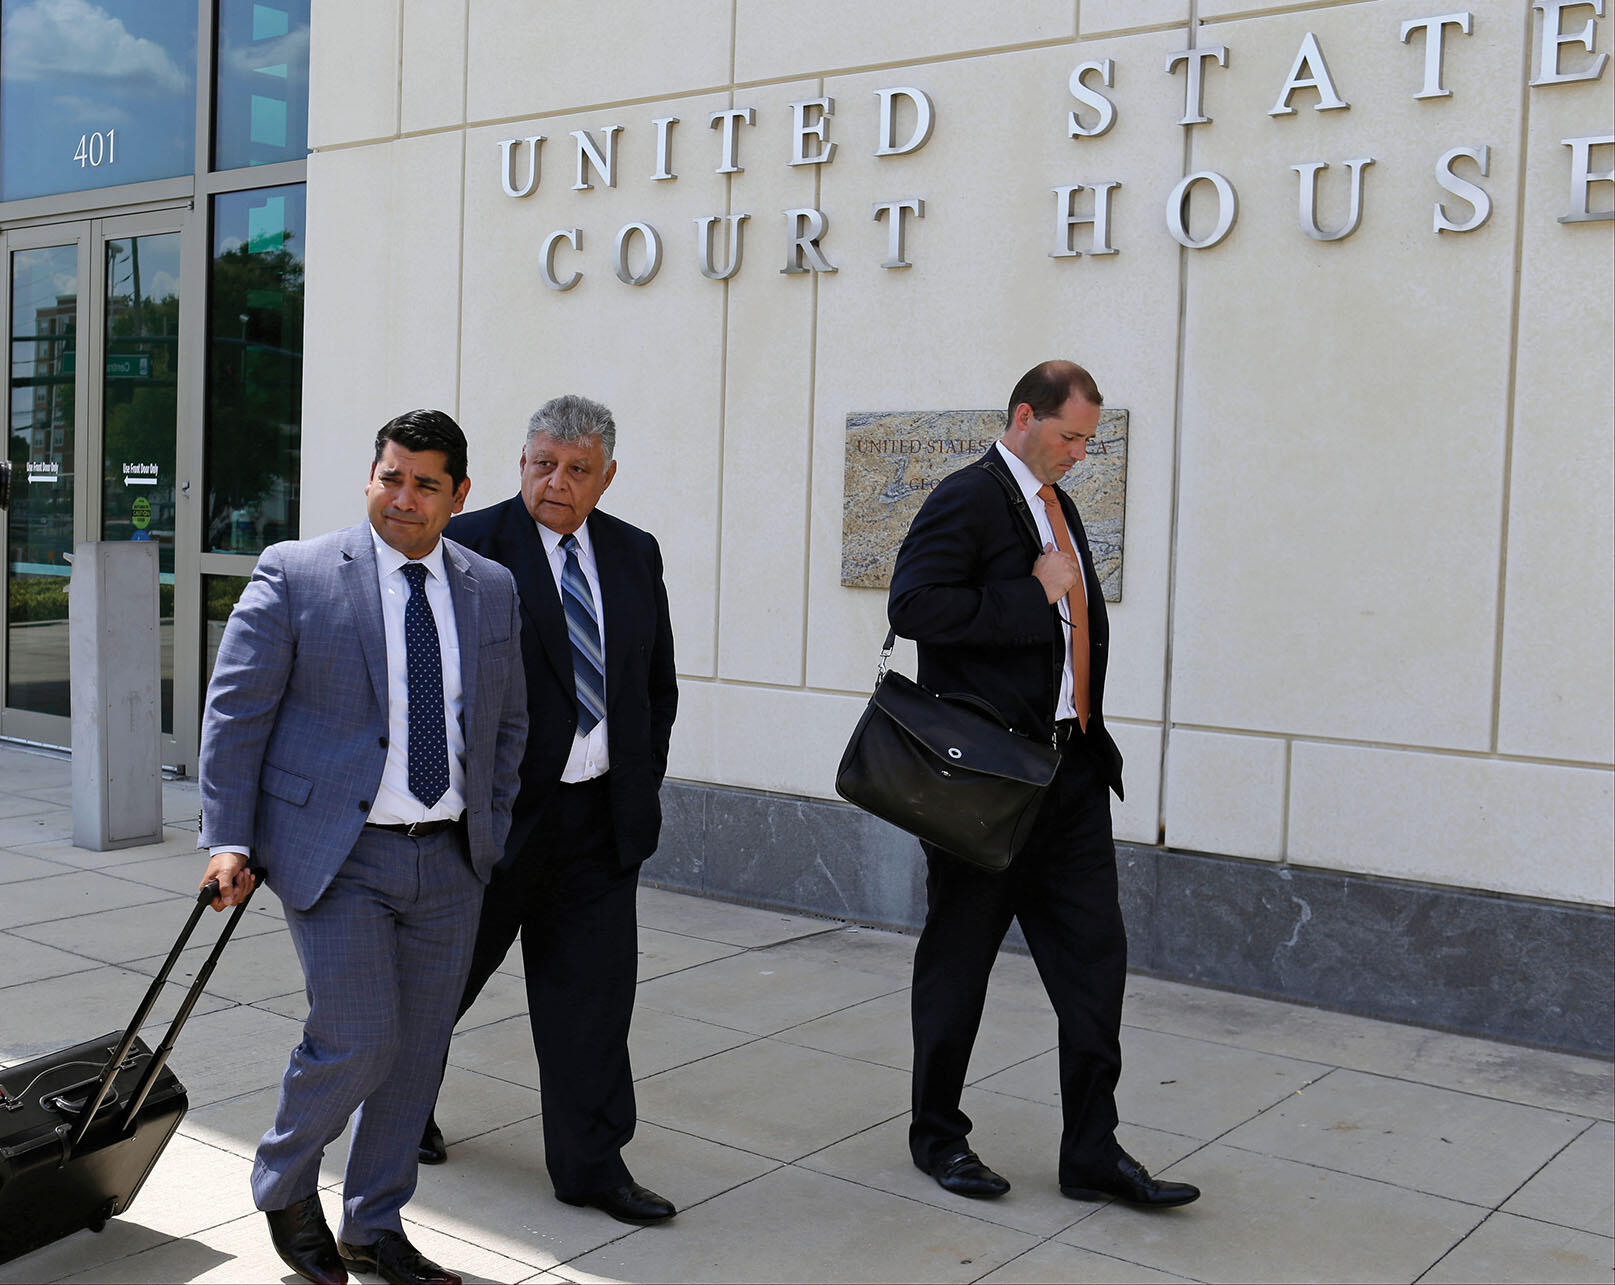 Pedro Pablo Barrientos Nuñez walks with his lawyers at the U.S. District Court, June 2016. (Photo by John Raoux/Associated Press.)